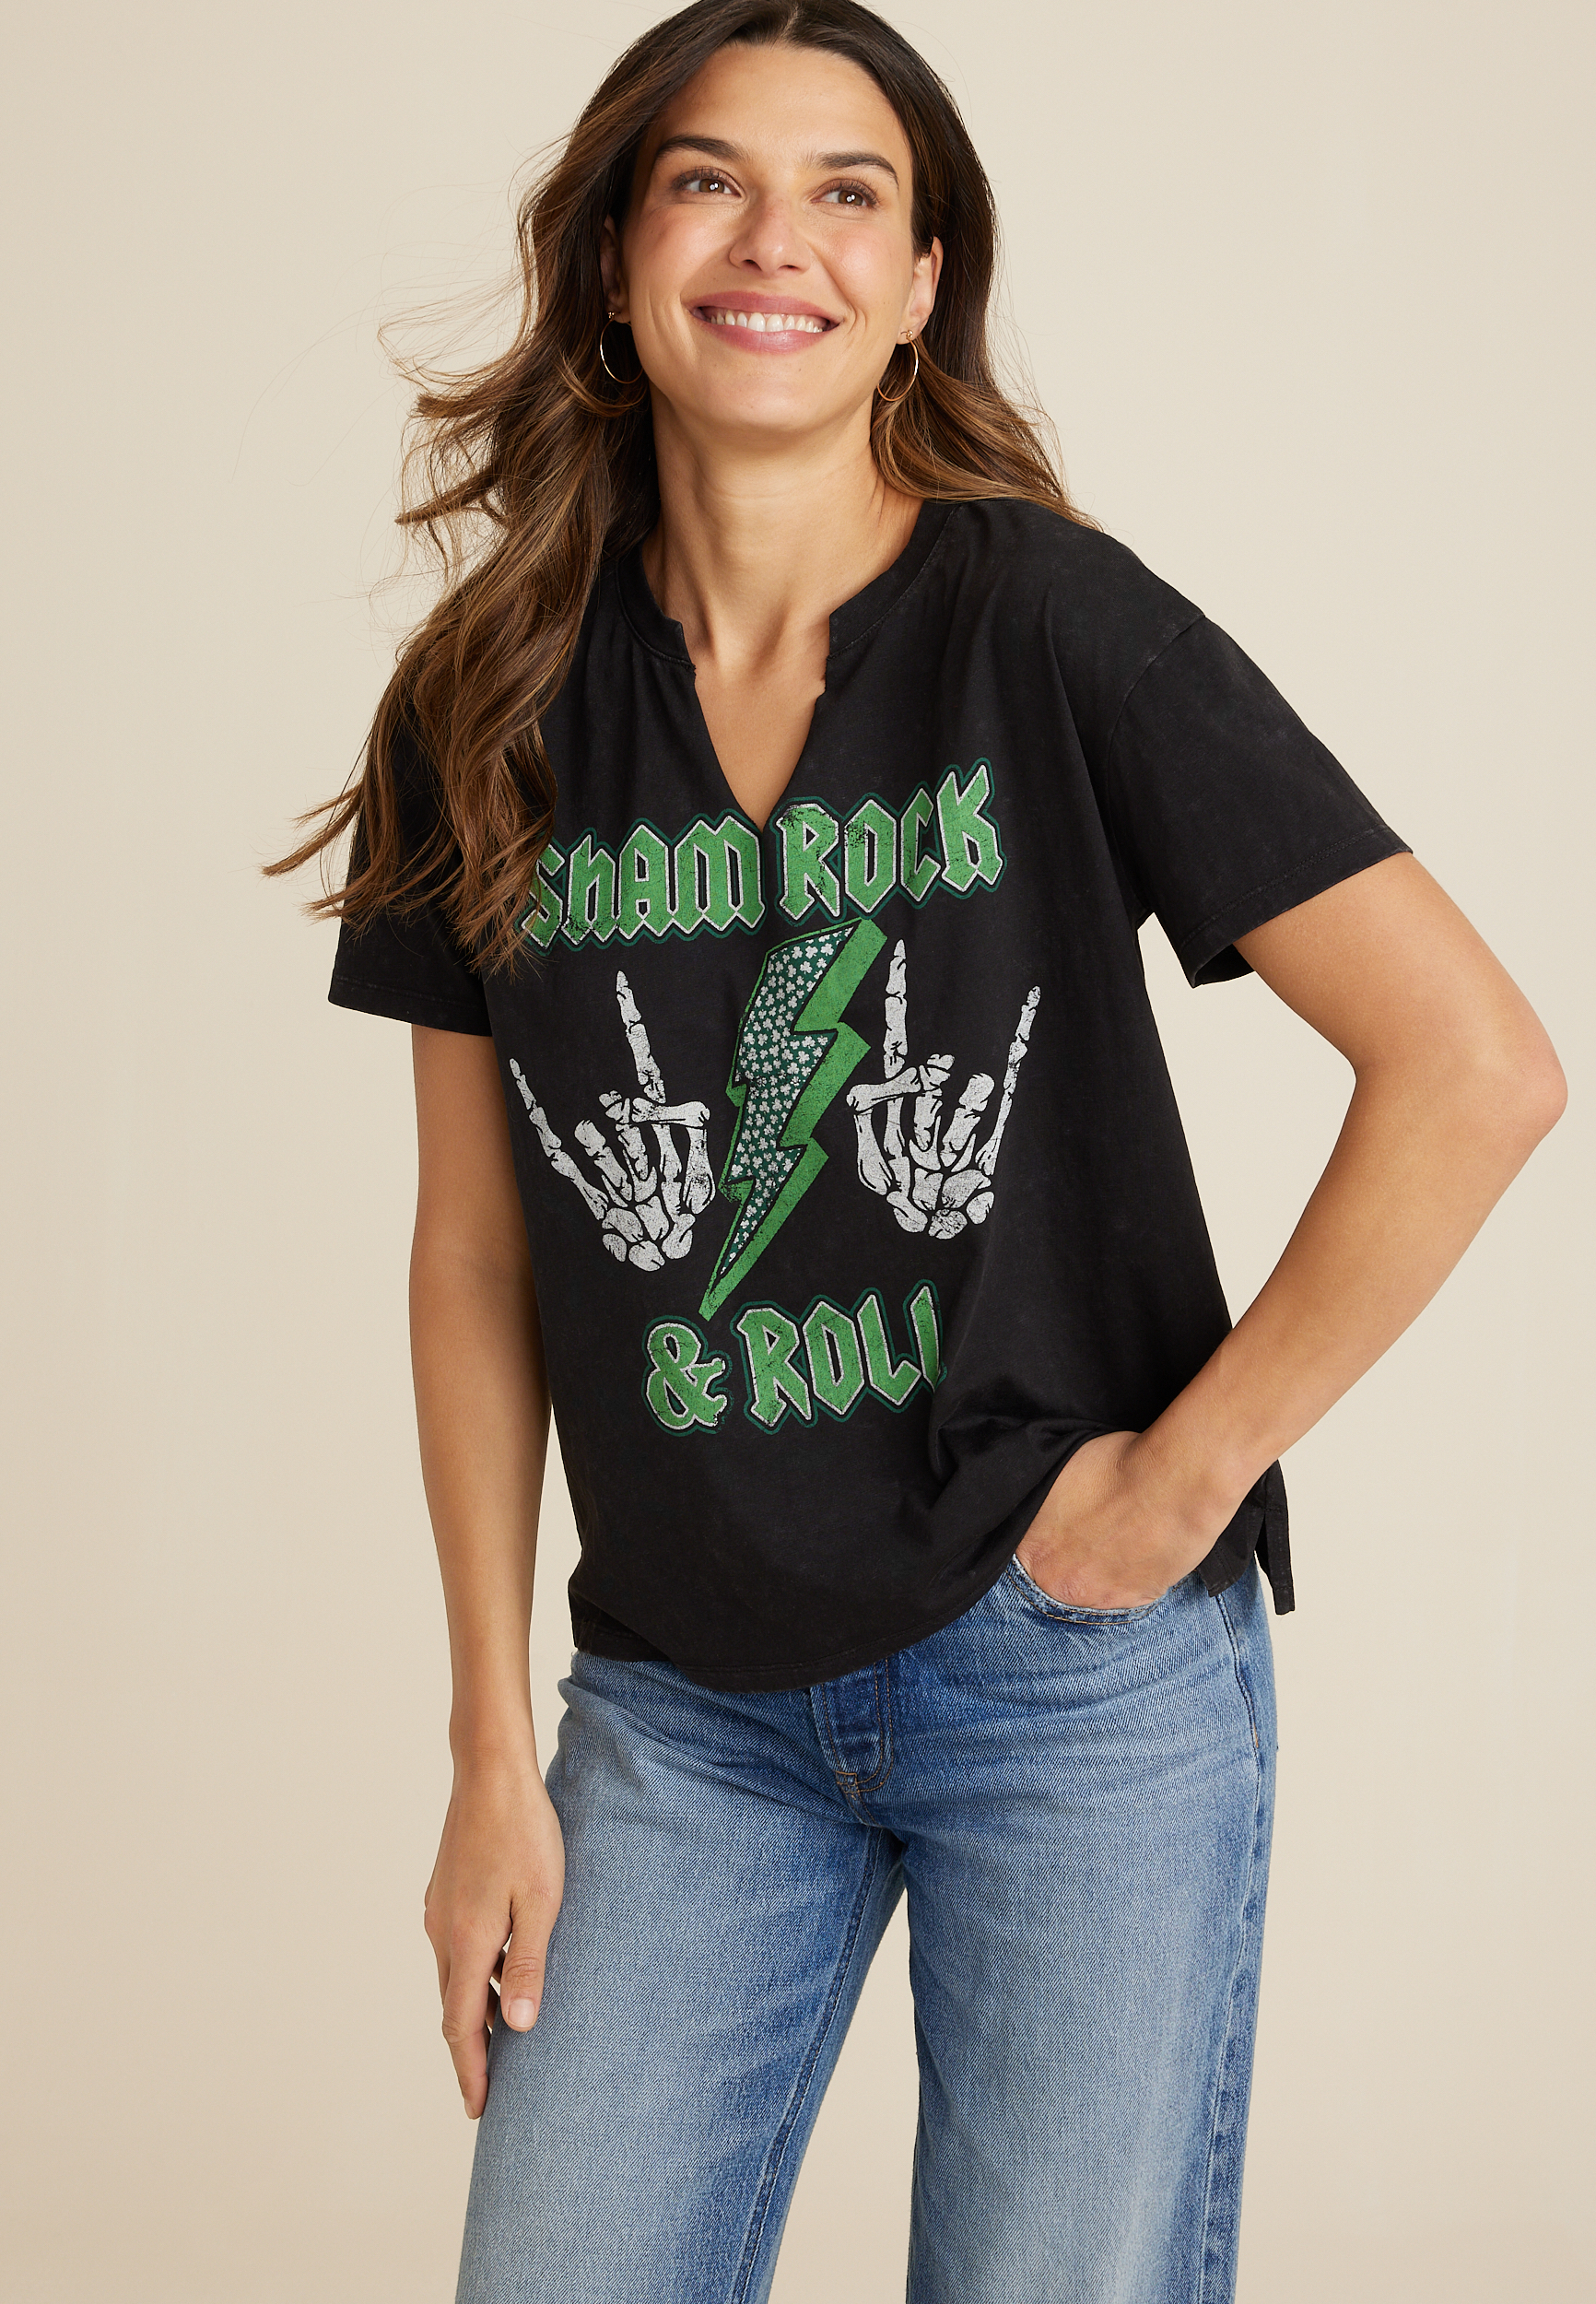 Sham Rock And Roll Oversized Fit Graphic Tee